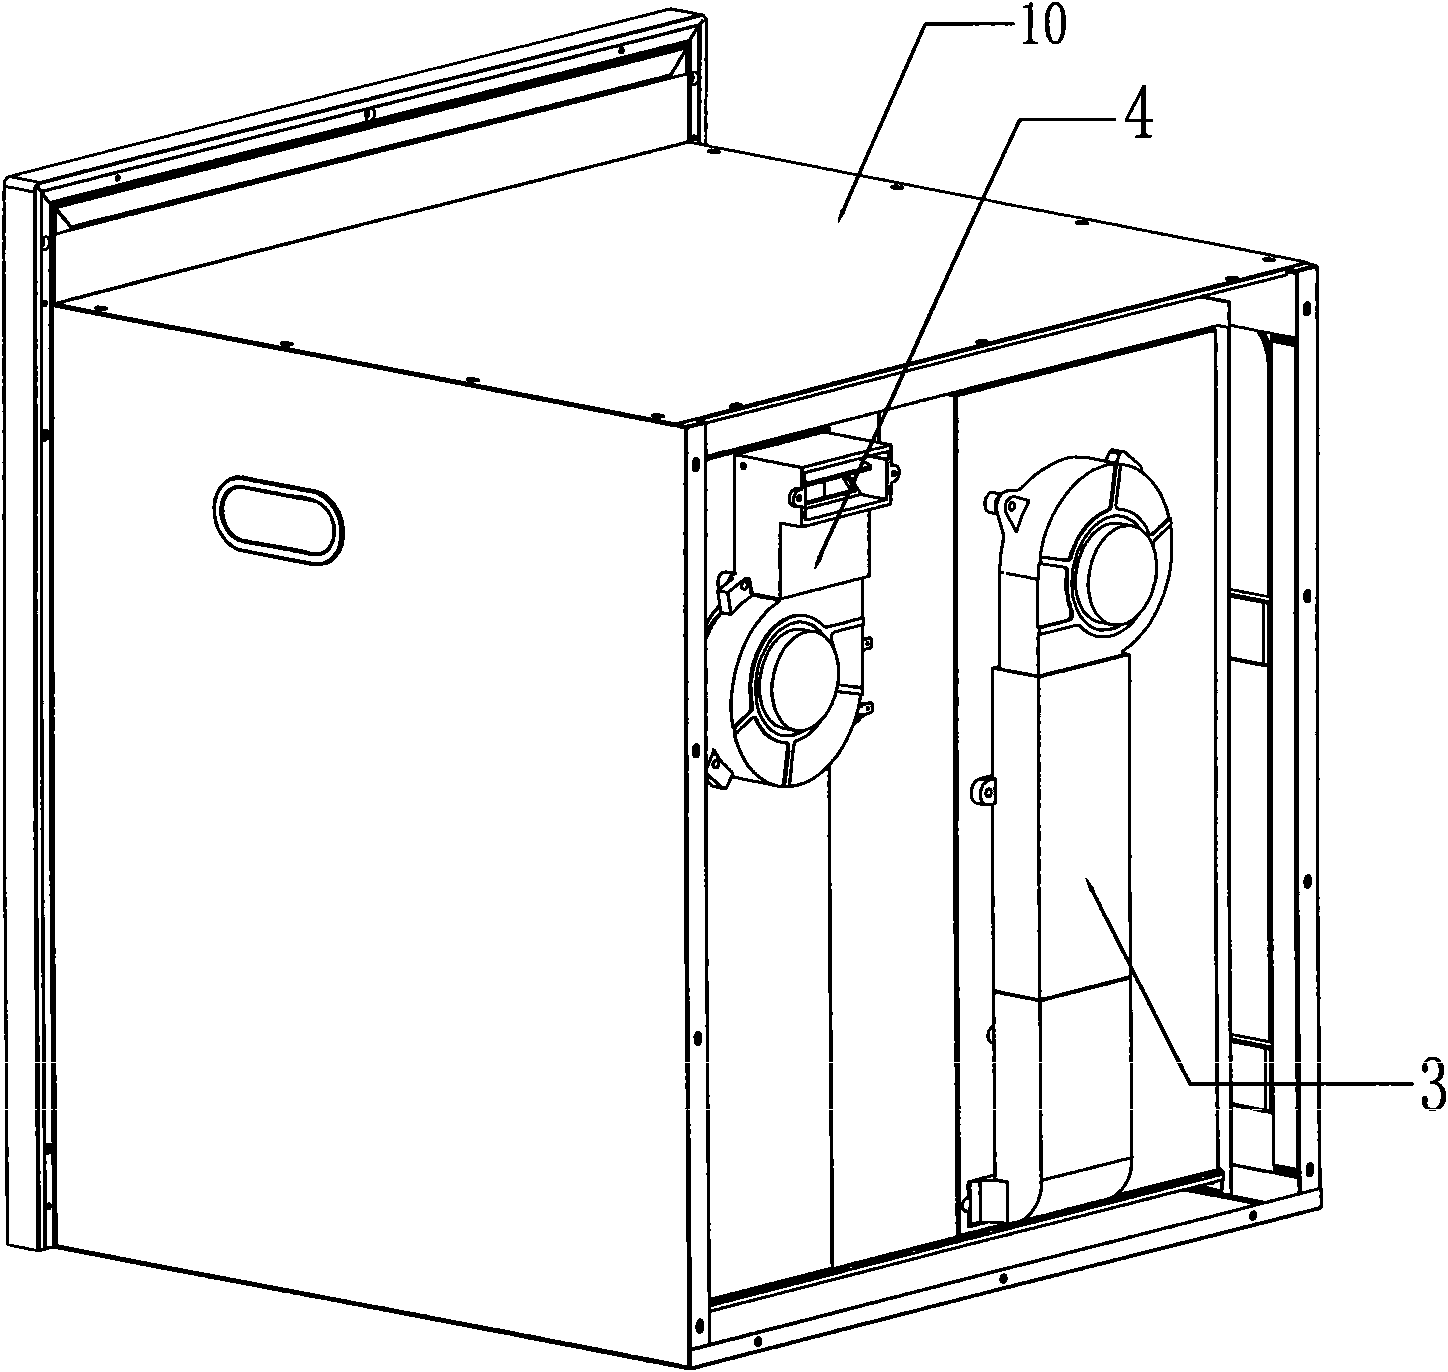 Dehumidifying and drying system device for cabinet